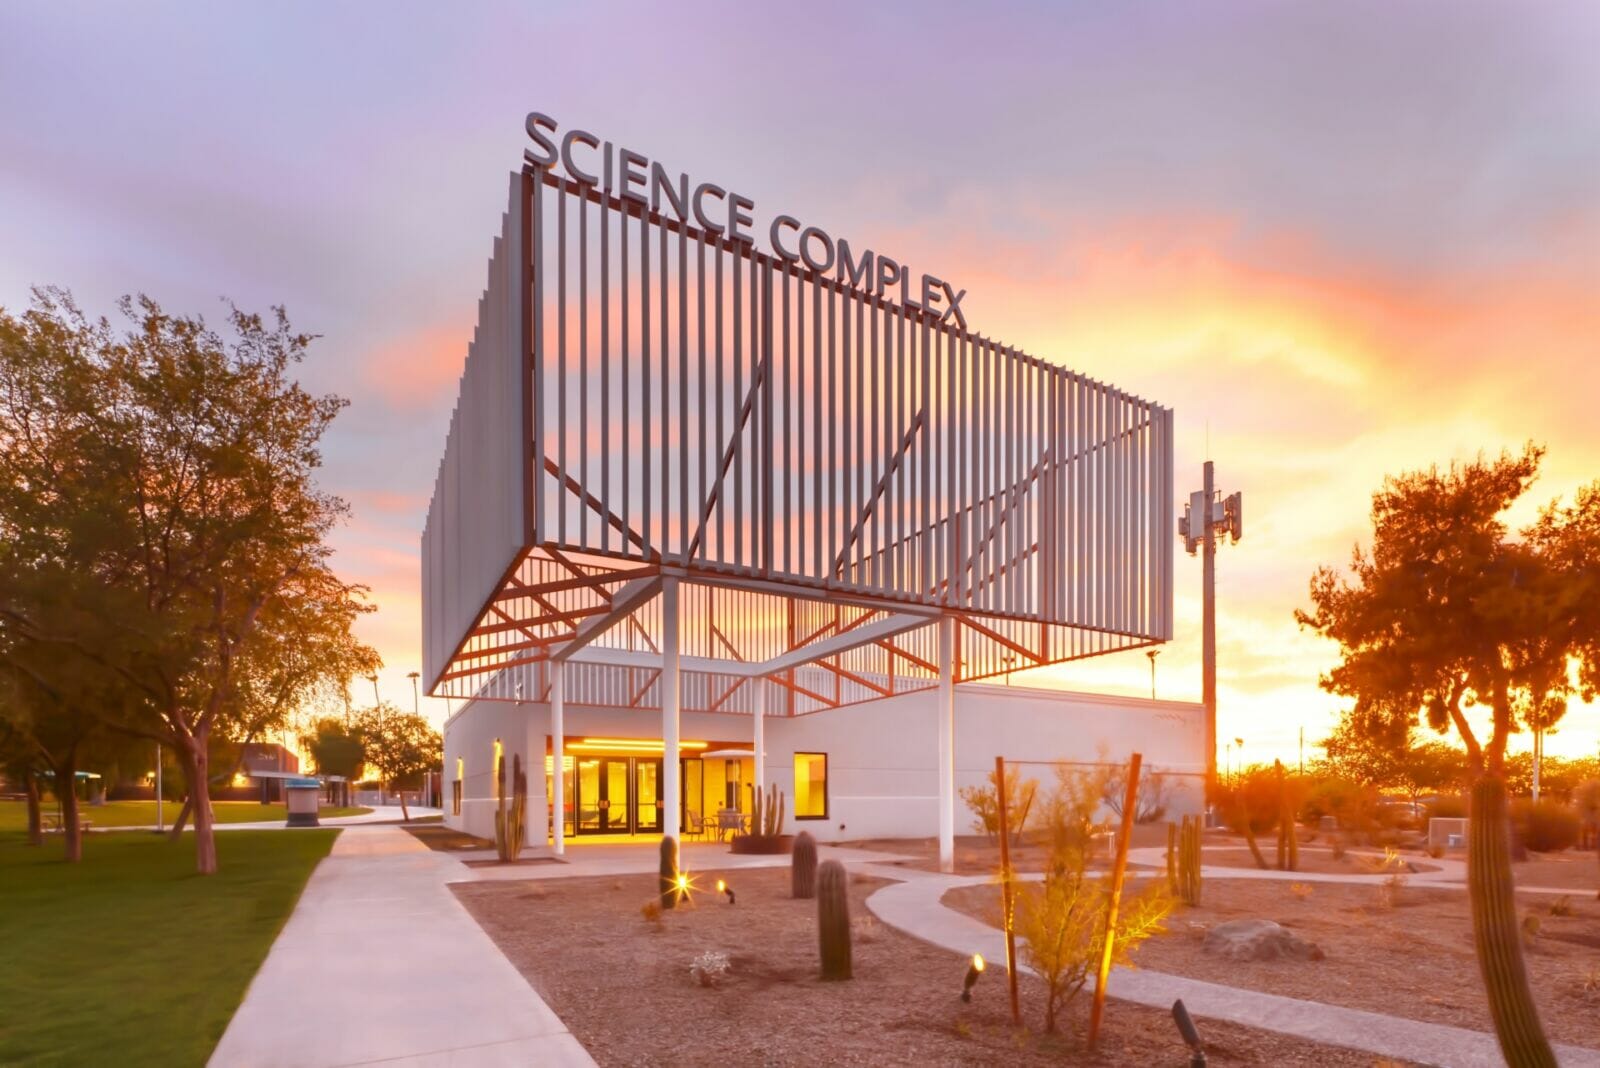 The new complex at South Mountain Community College features about 34,000 square feet of expansion and renovations to existing facilities.